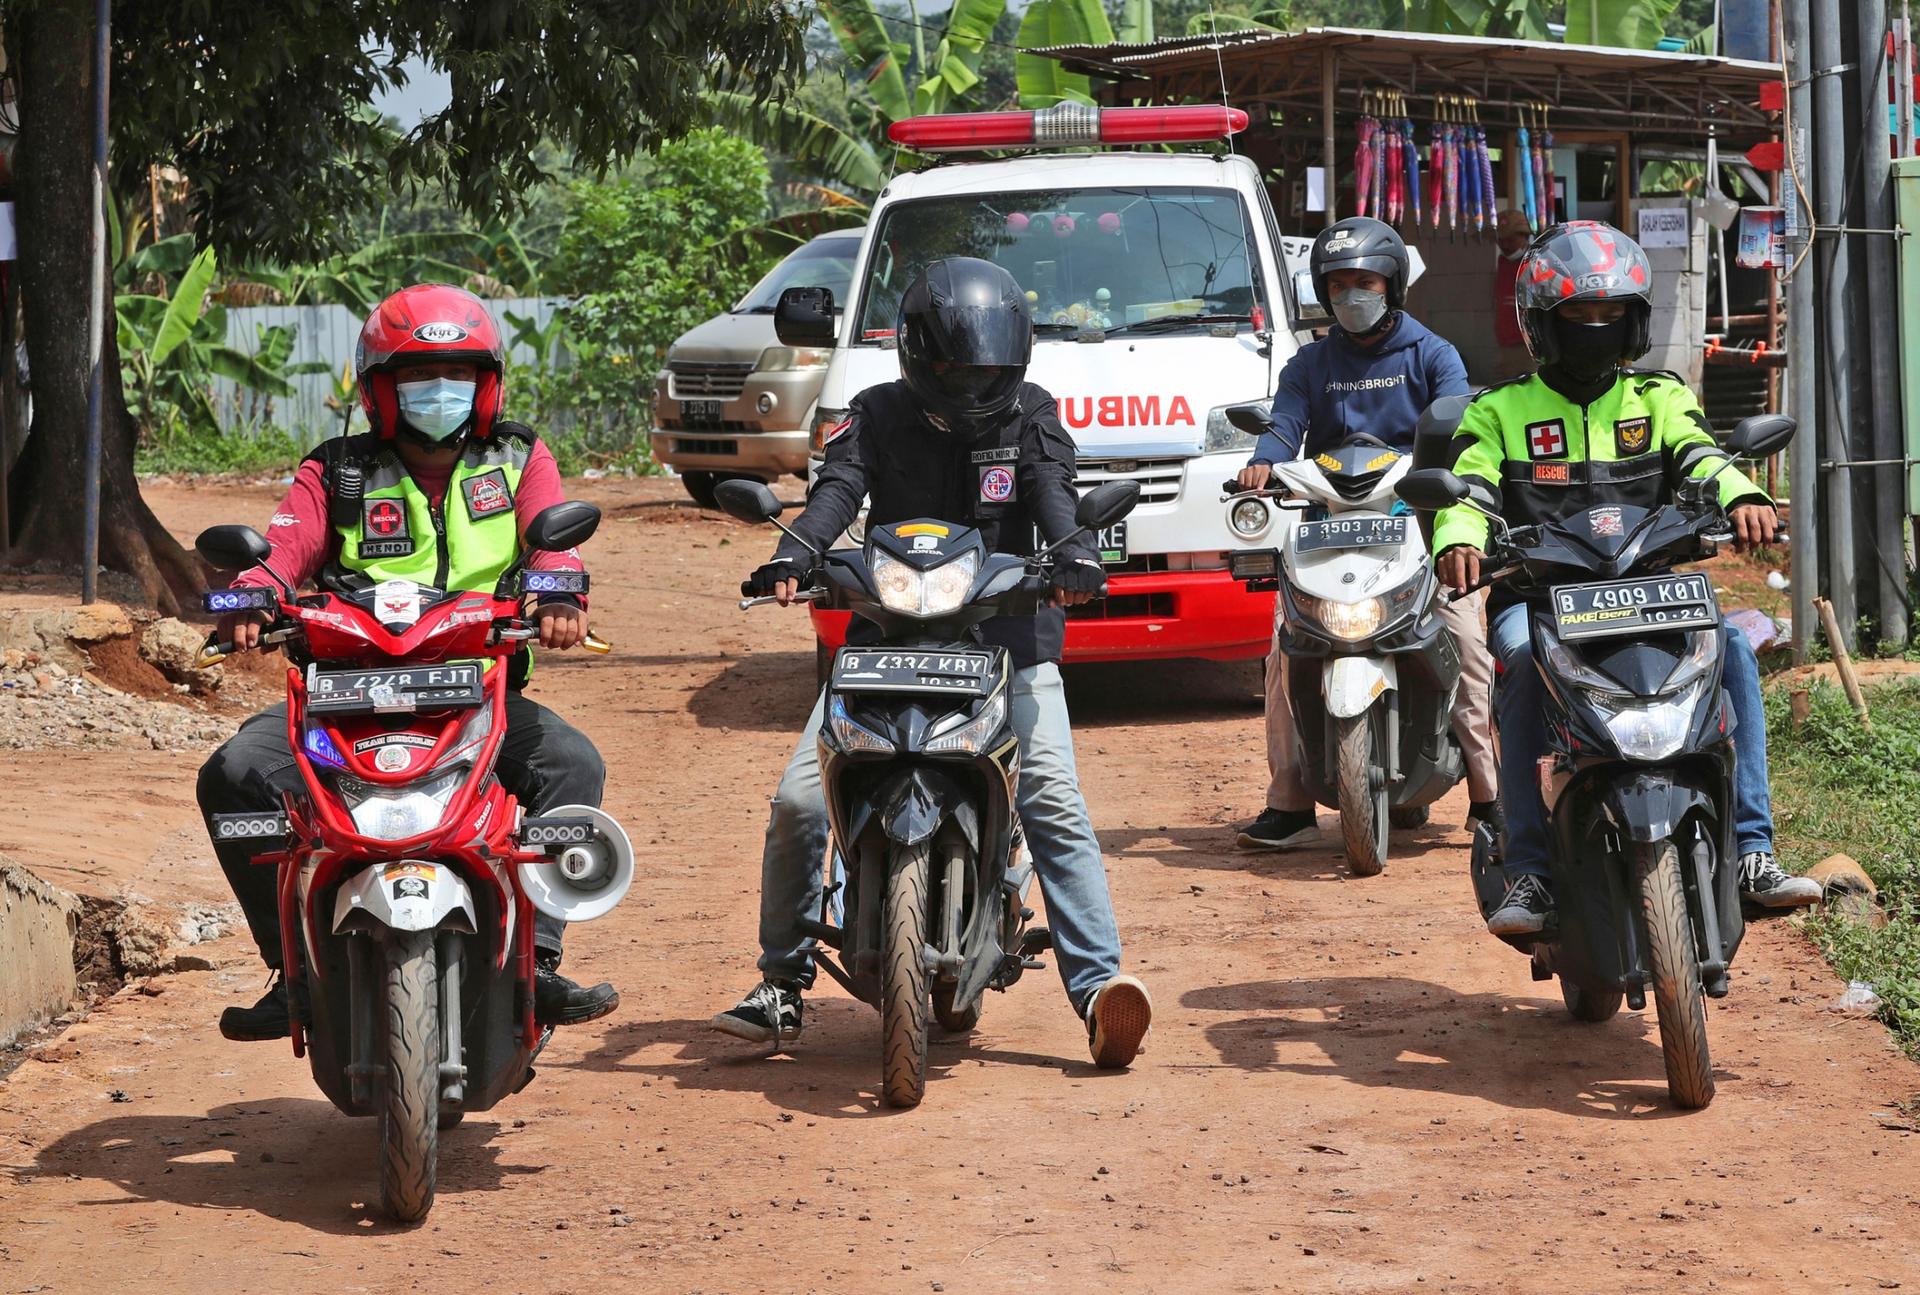 Four people on motorbikes are shown wearing helmets with an ambulance driving behind them.